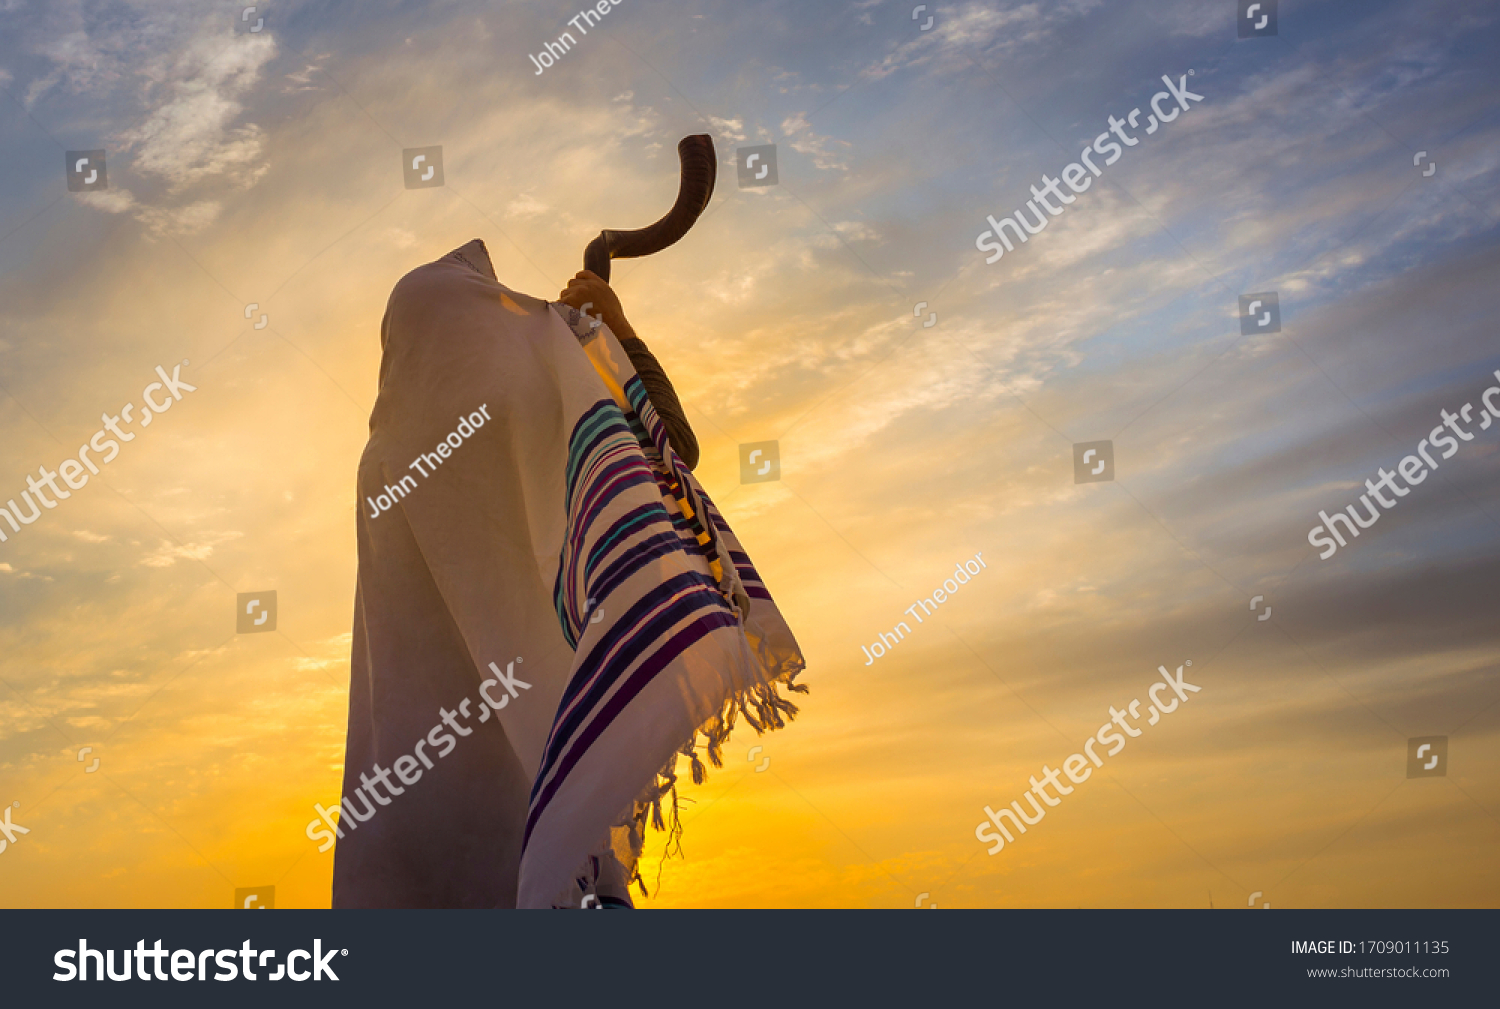 Blowing the shofar for the Feast of Trumpets - Jewish man in a traditional tallit prayer shawl blowing the ram's horn against dramatic sunset sky #1709011135